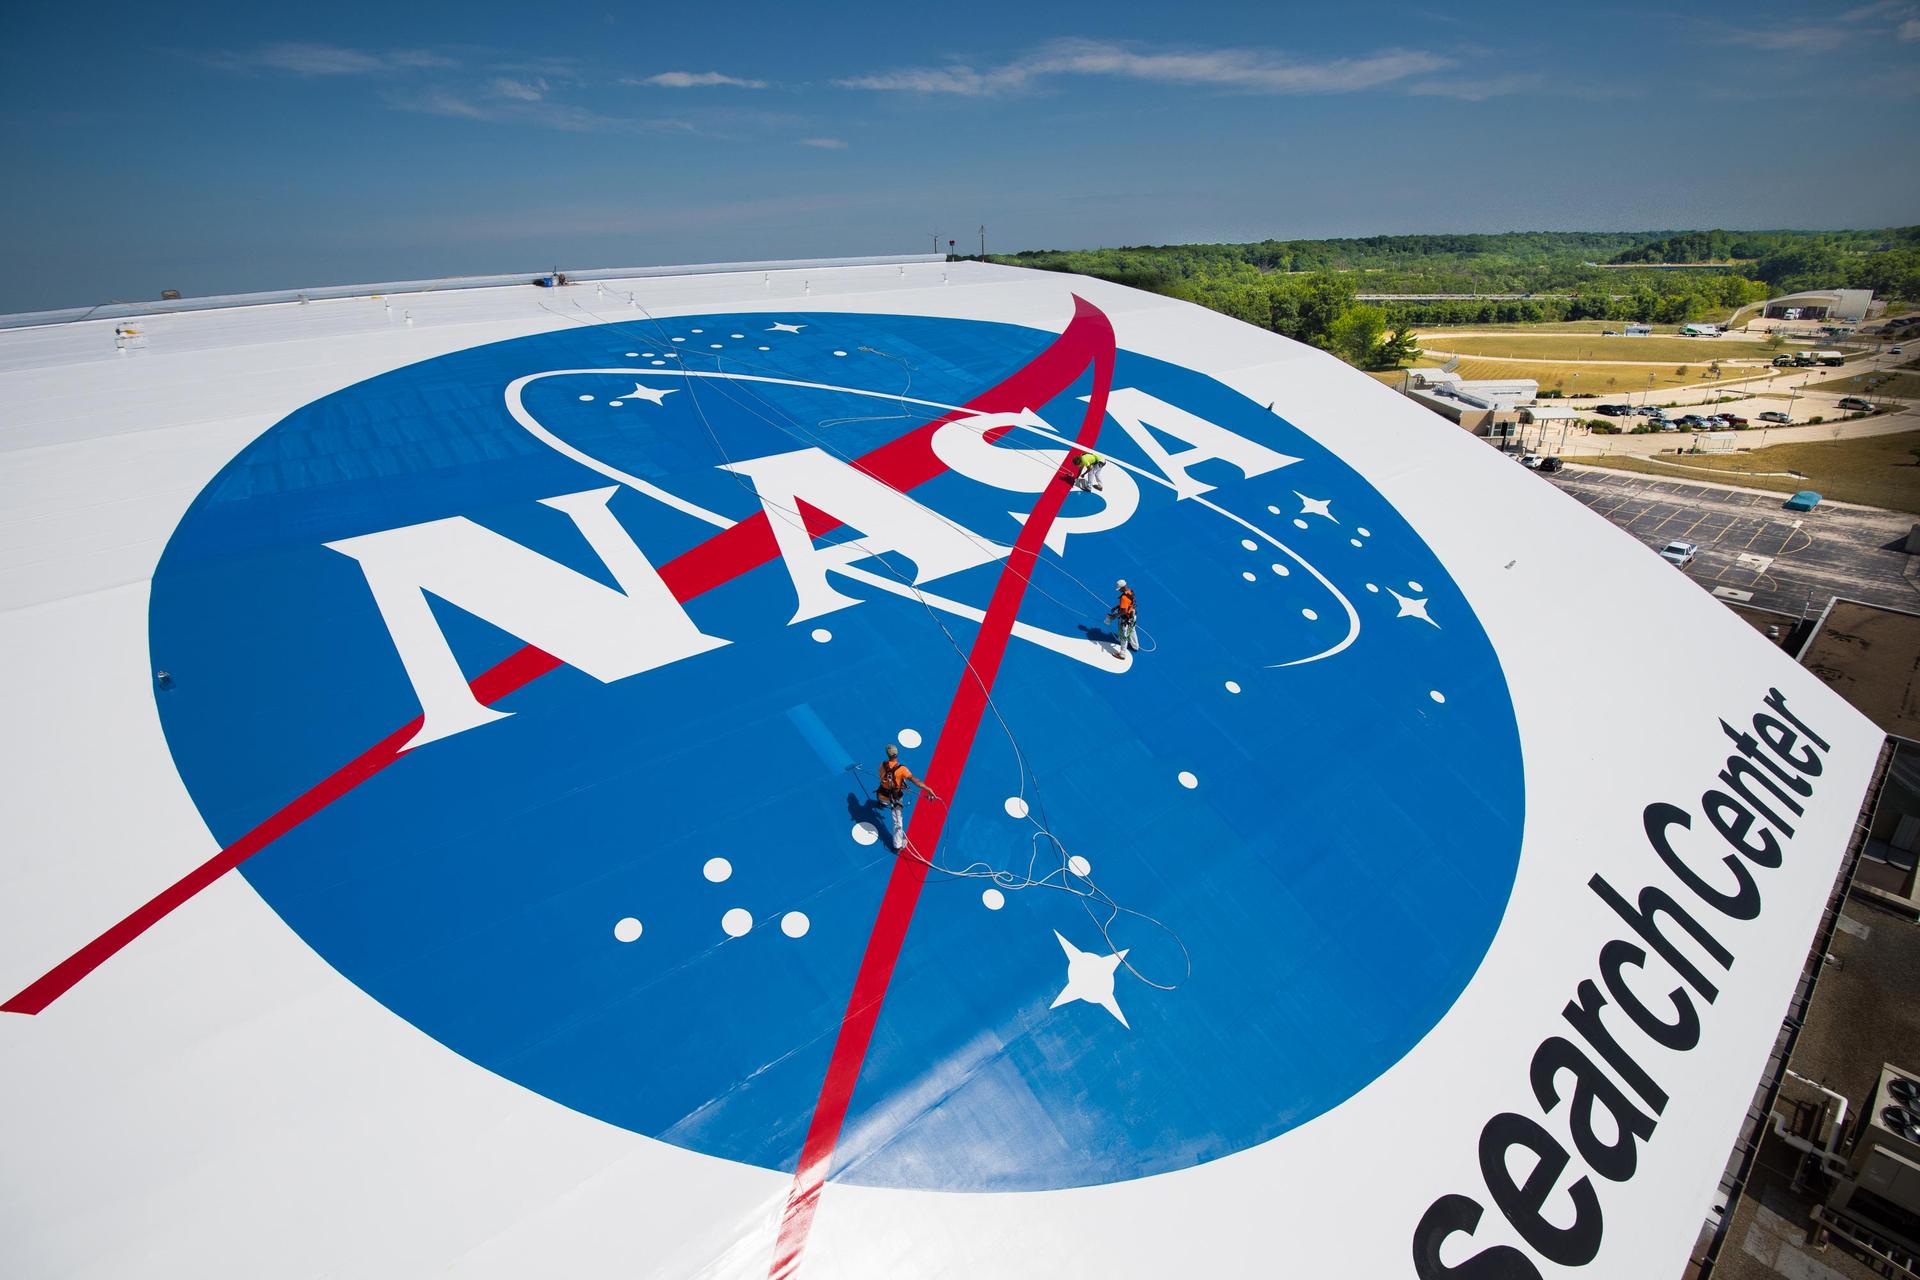 Workers paint the Nasa logo on a building at Nasa’s Glenn Research Center